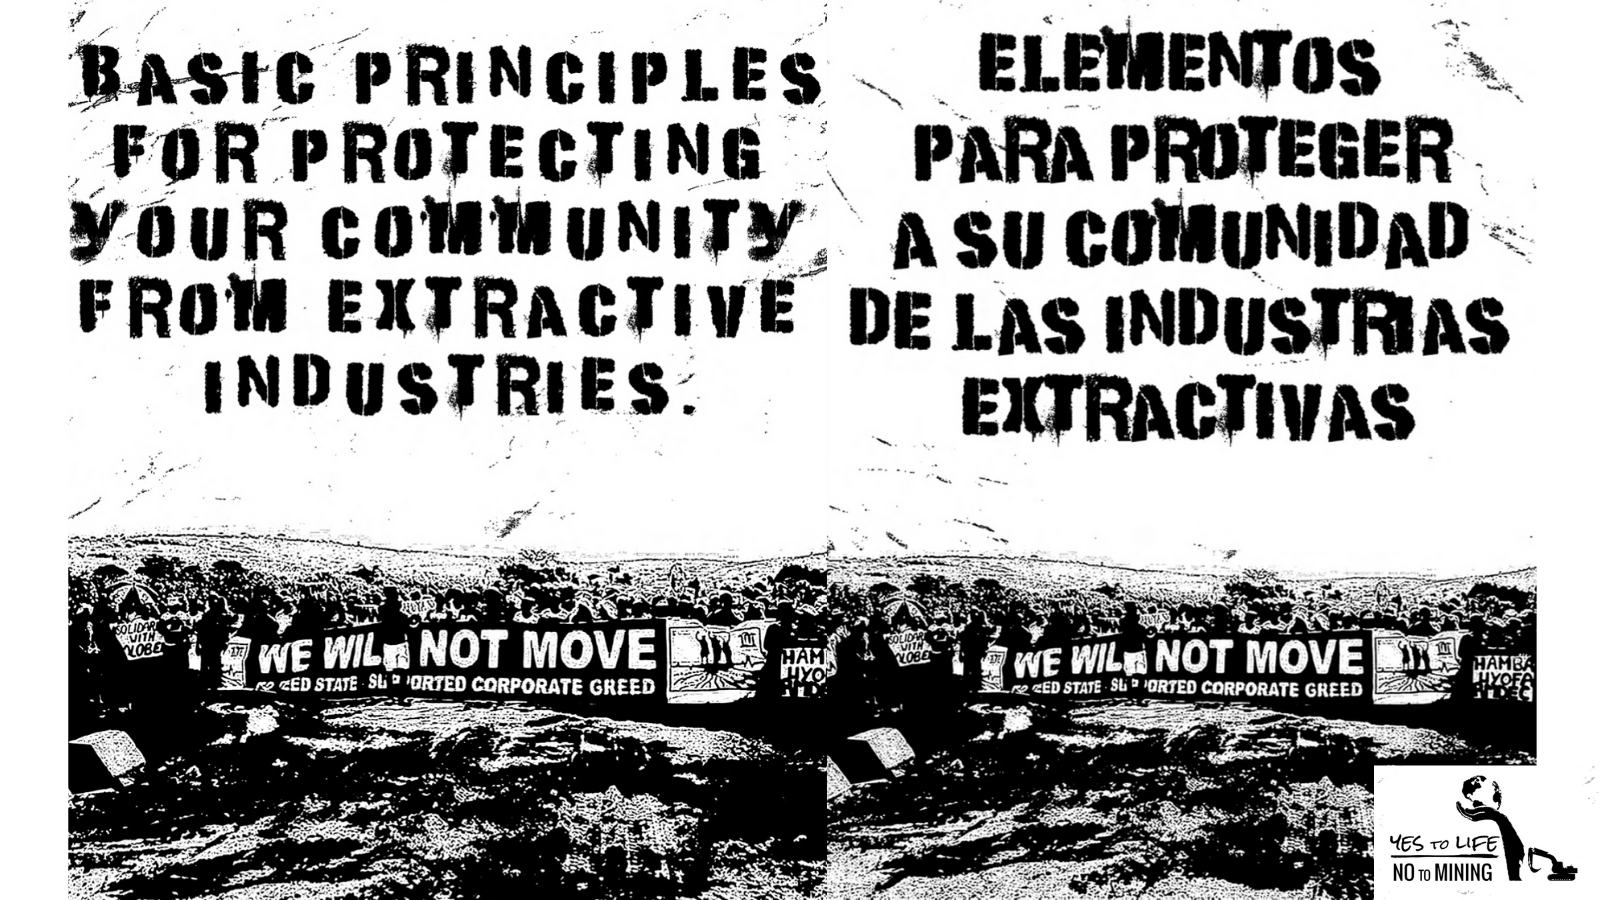 Guide to resisting mining – new edition released on the Global Day Against Mega Mining